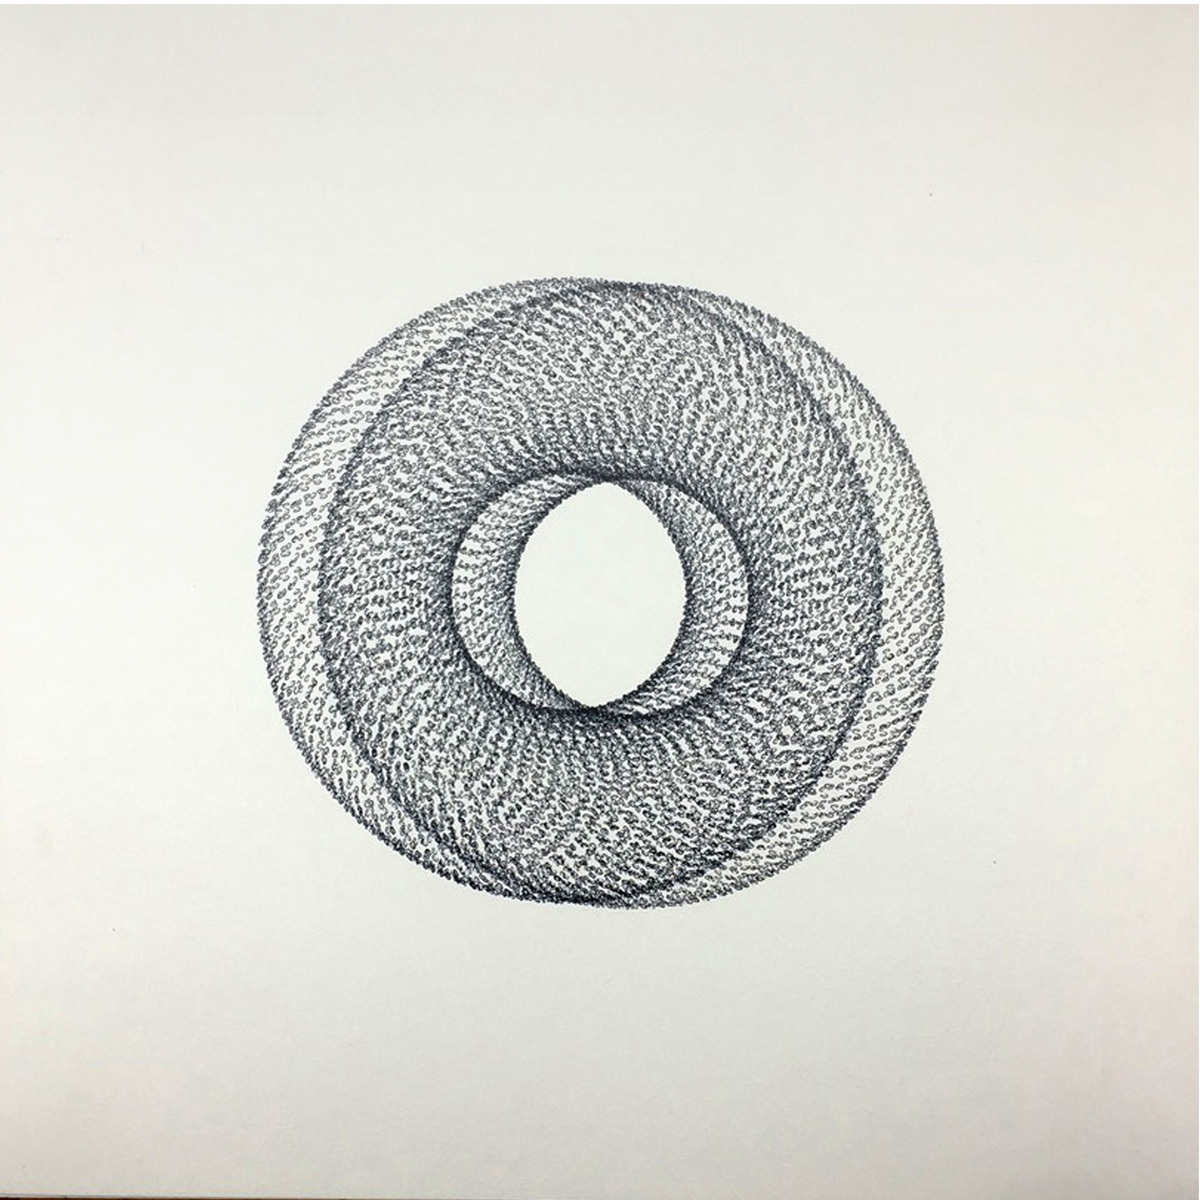 two circles on top of each other with one being smaller and small lines to give dimension and texture. Circles are made of small letterforms using black ink on white paper.